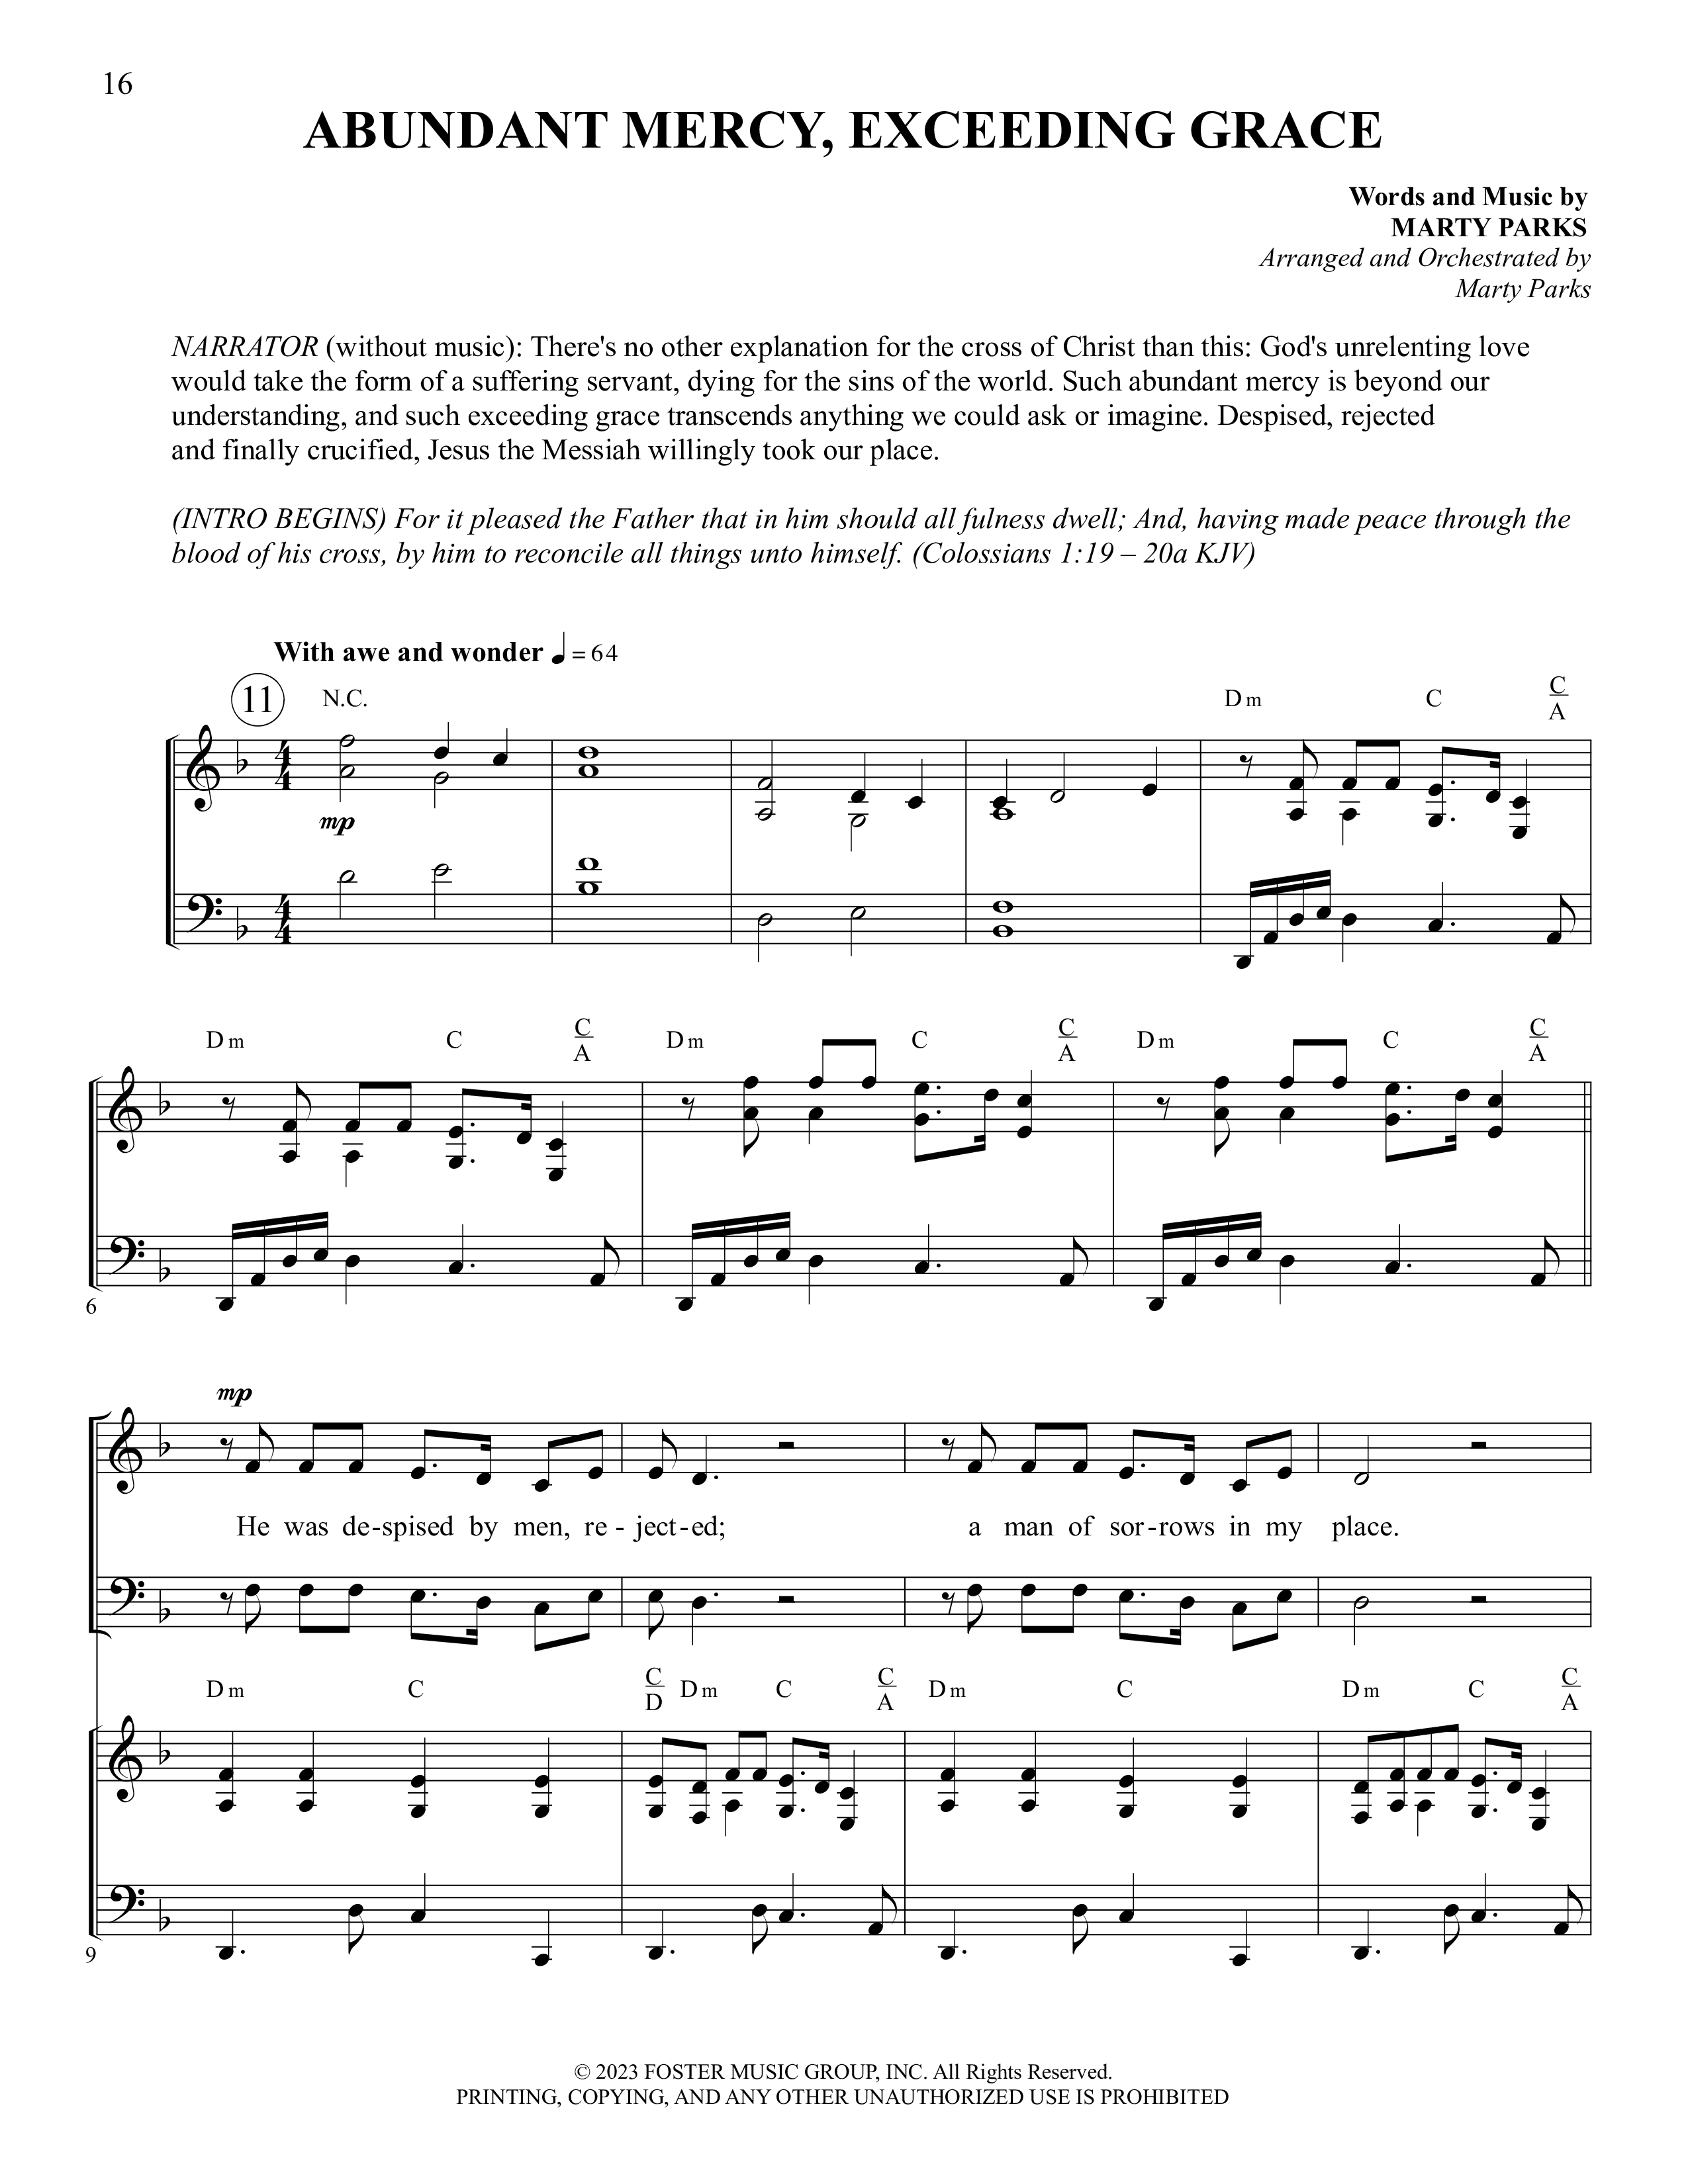 Glorious Cross (5 Song Choral Collection) Song 3 (Piano SATB) (Foster Music Group / Arr. Marty Parks)